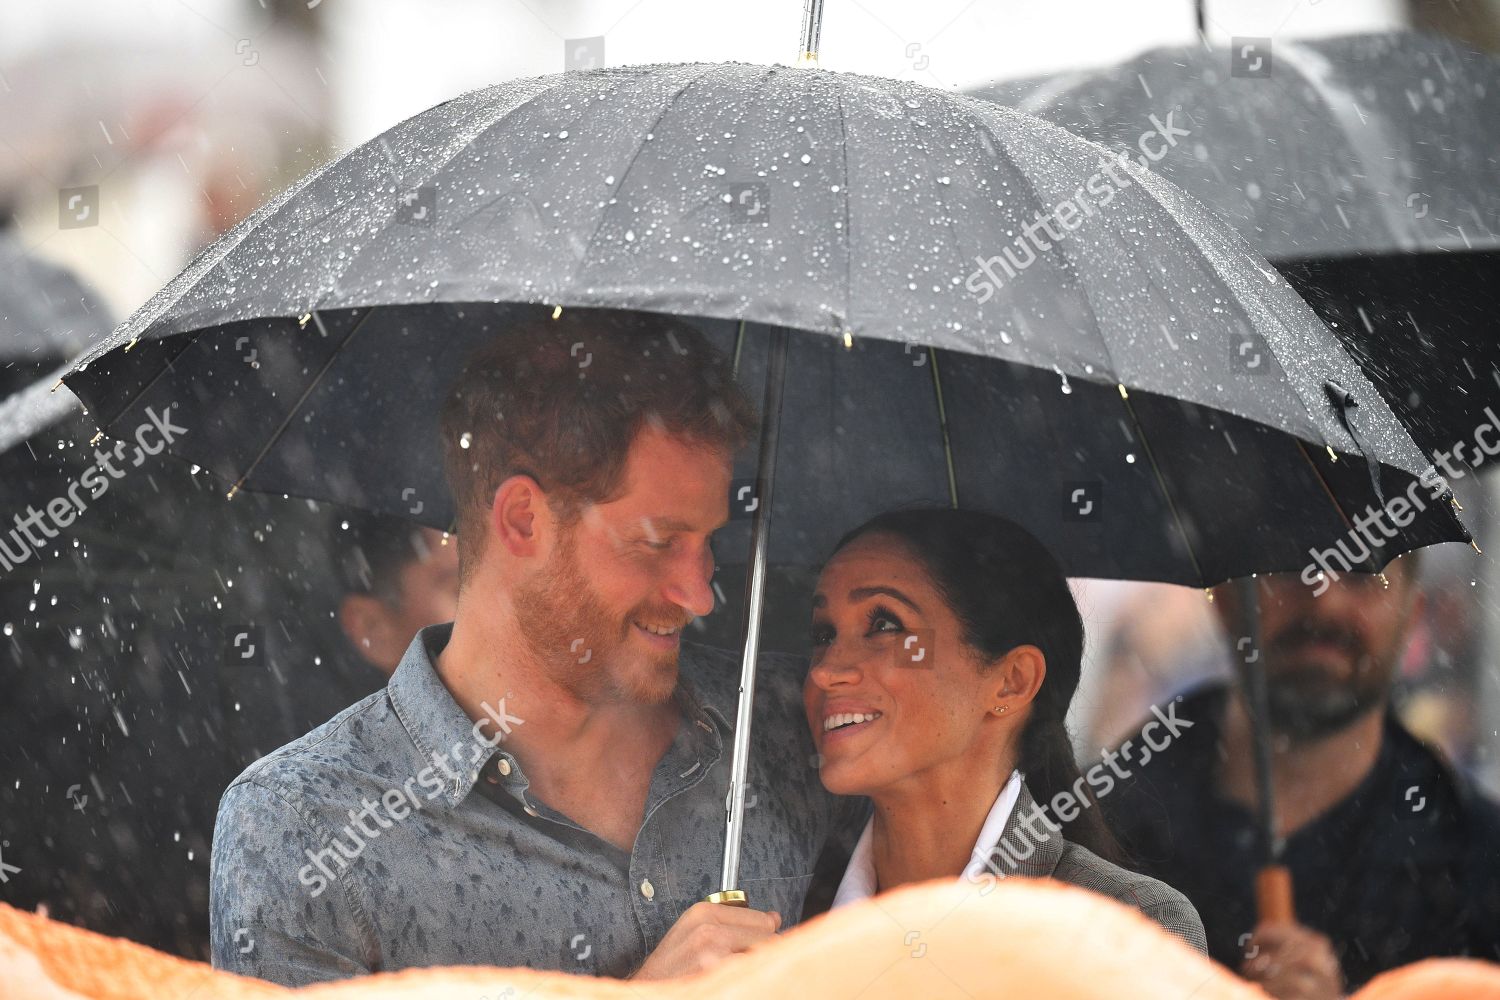 prince-harry-and-meghan-duchess-of-sussex-tour-of-australia-shutterstock-editorial-9934625g.jpg